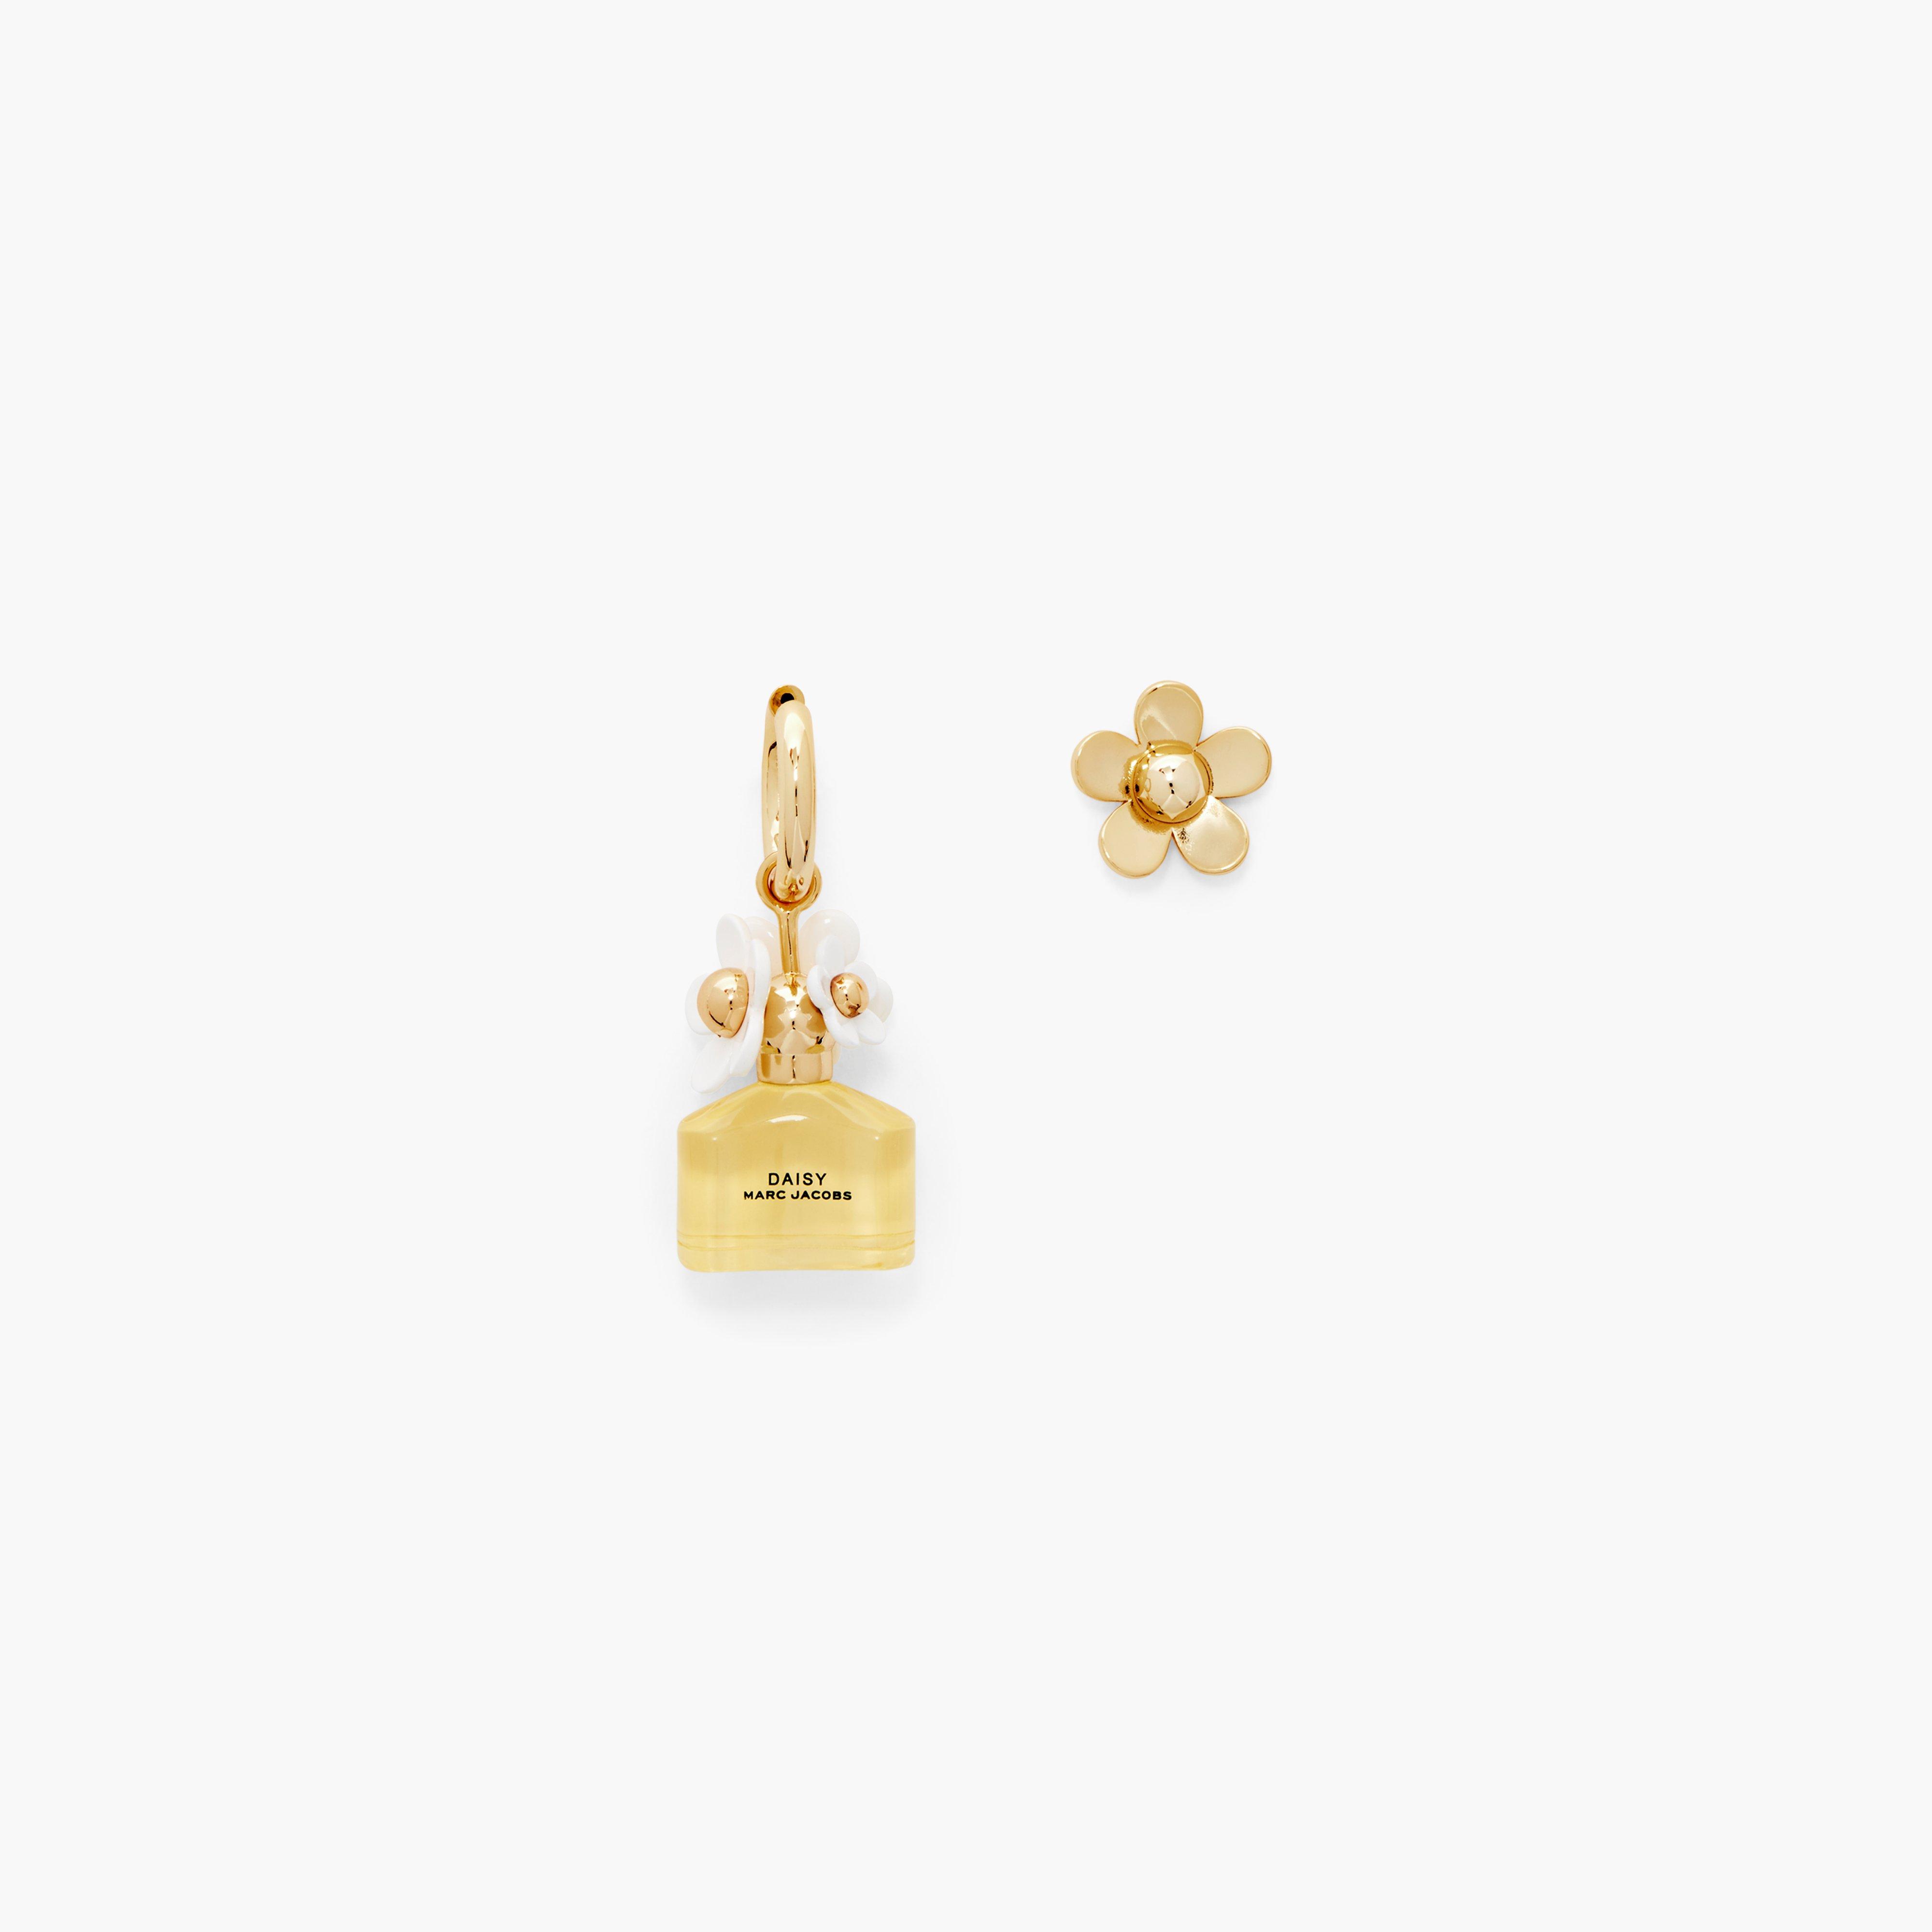 Marc by Marc jacobs Mini Icon Daisy Earrings,GOLD/YELLOW MULTI